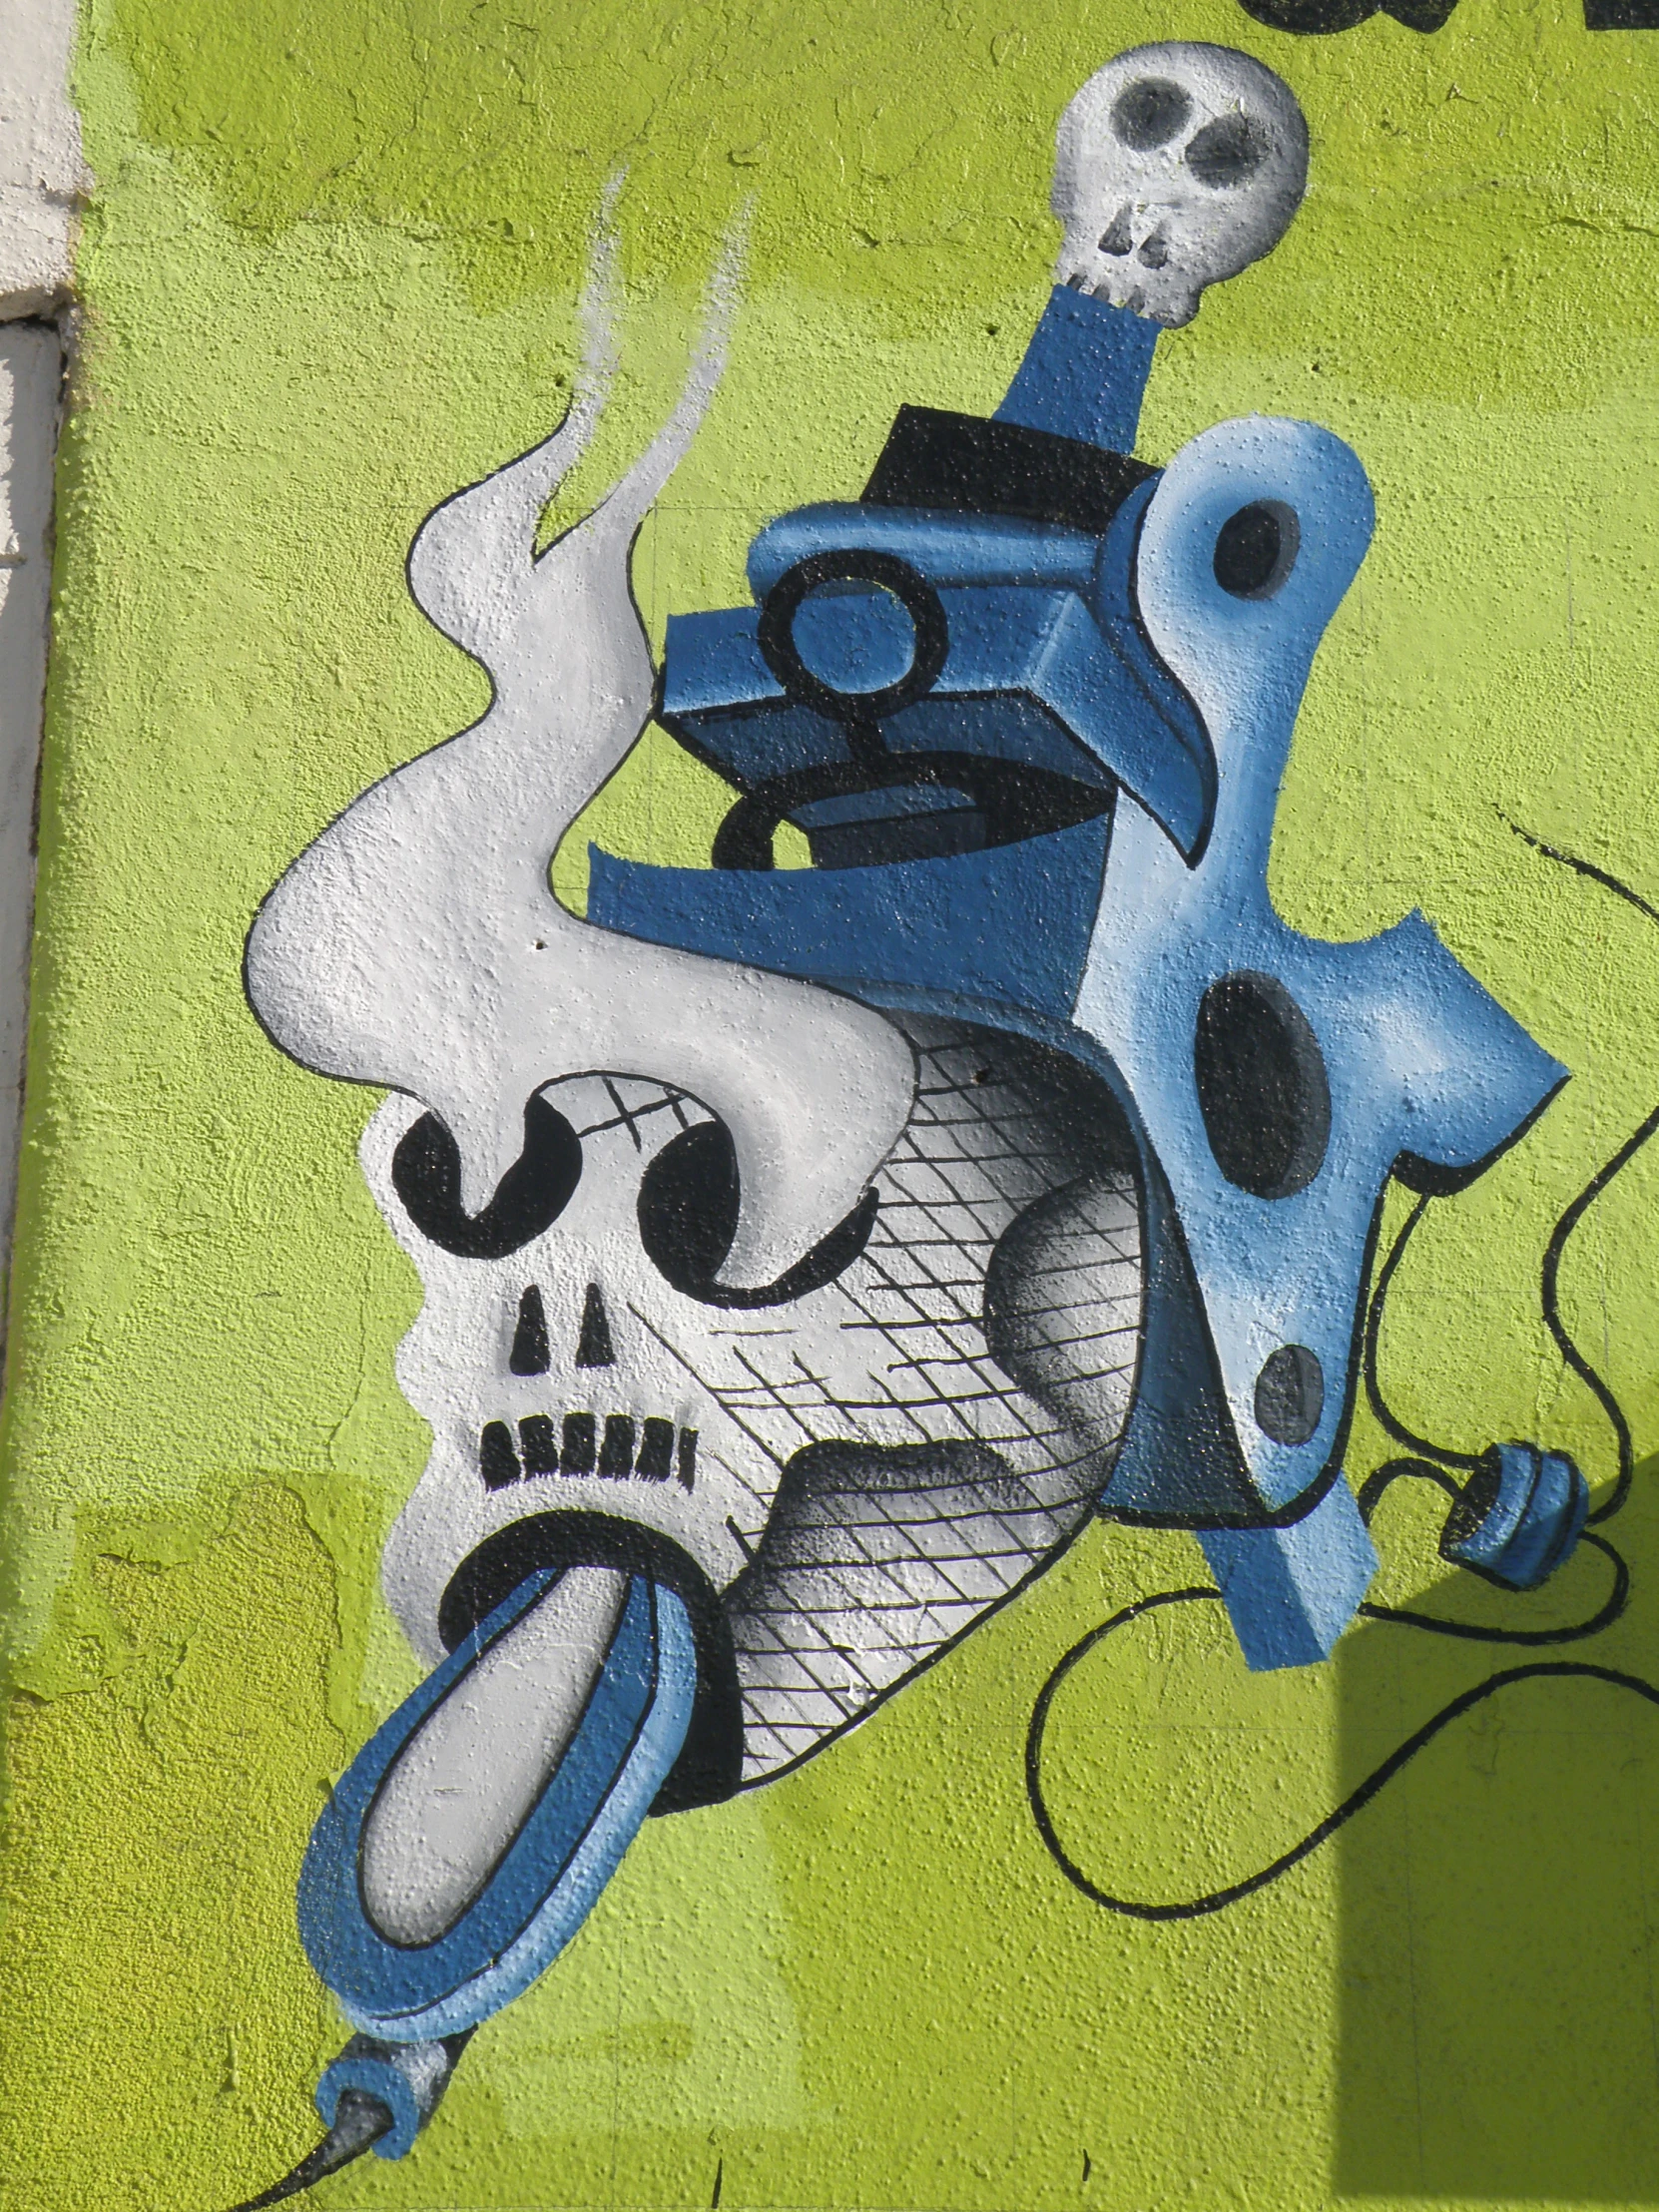 a graffiti painted on the side of a building near a street